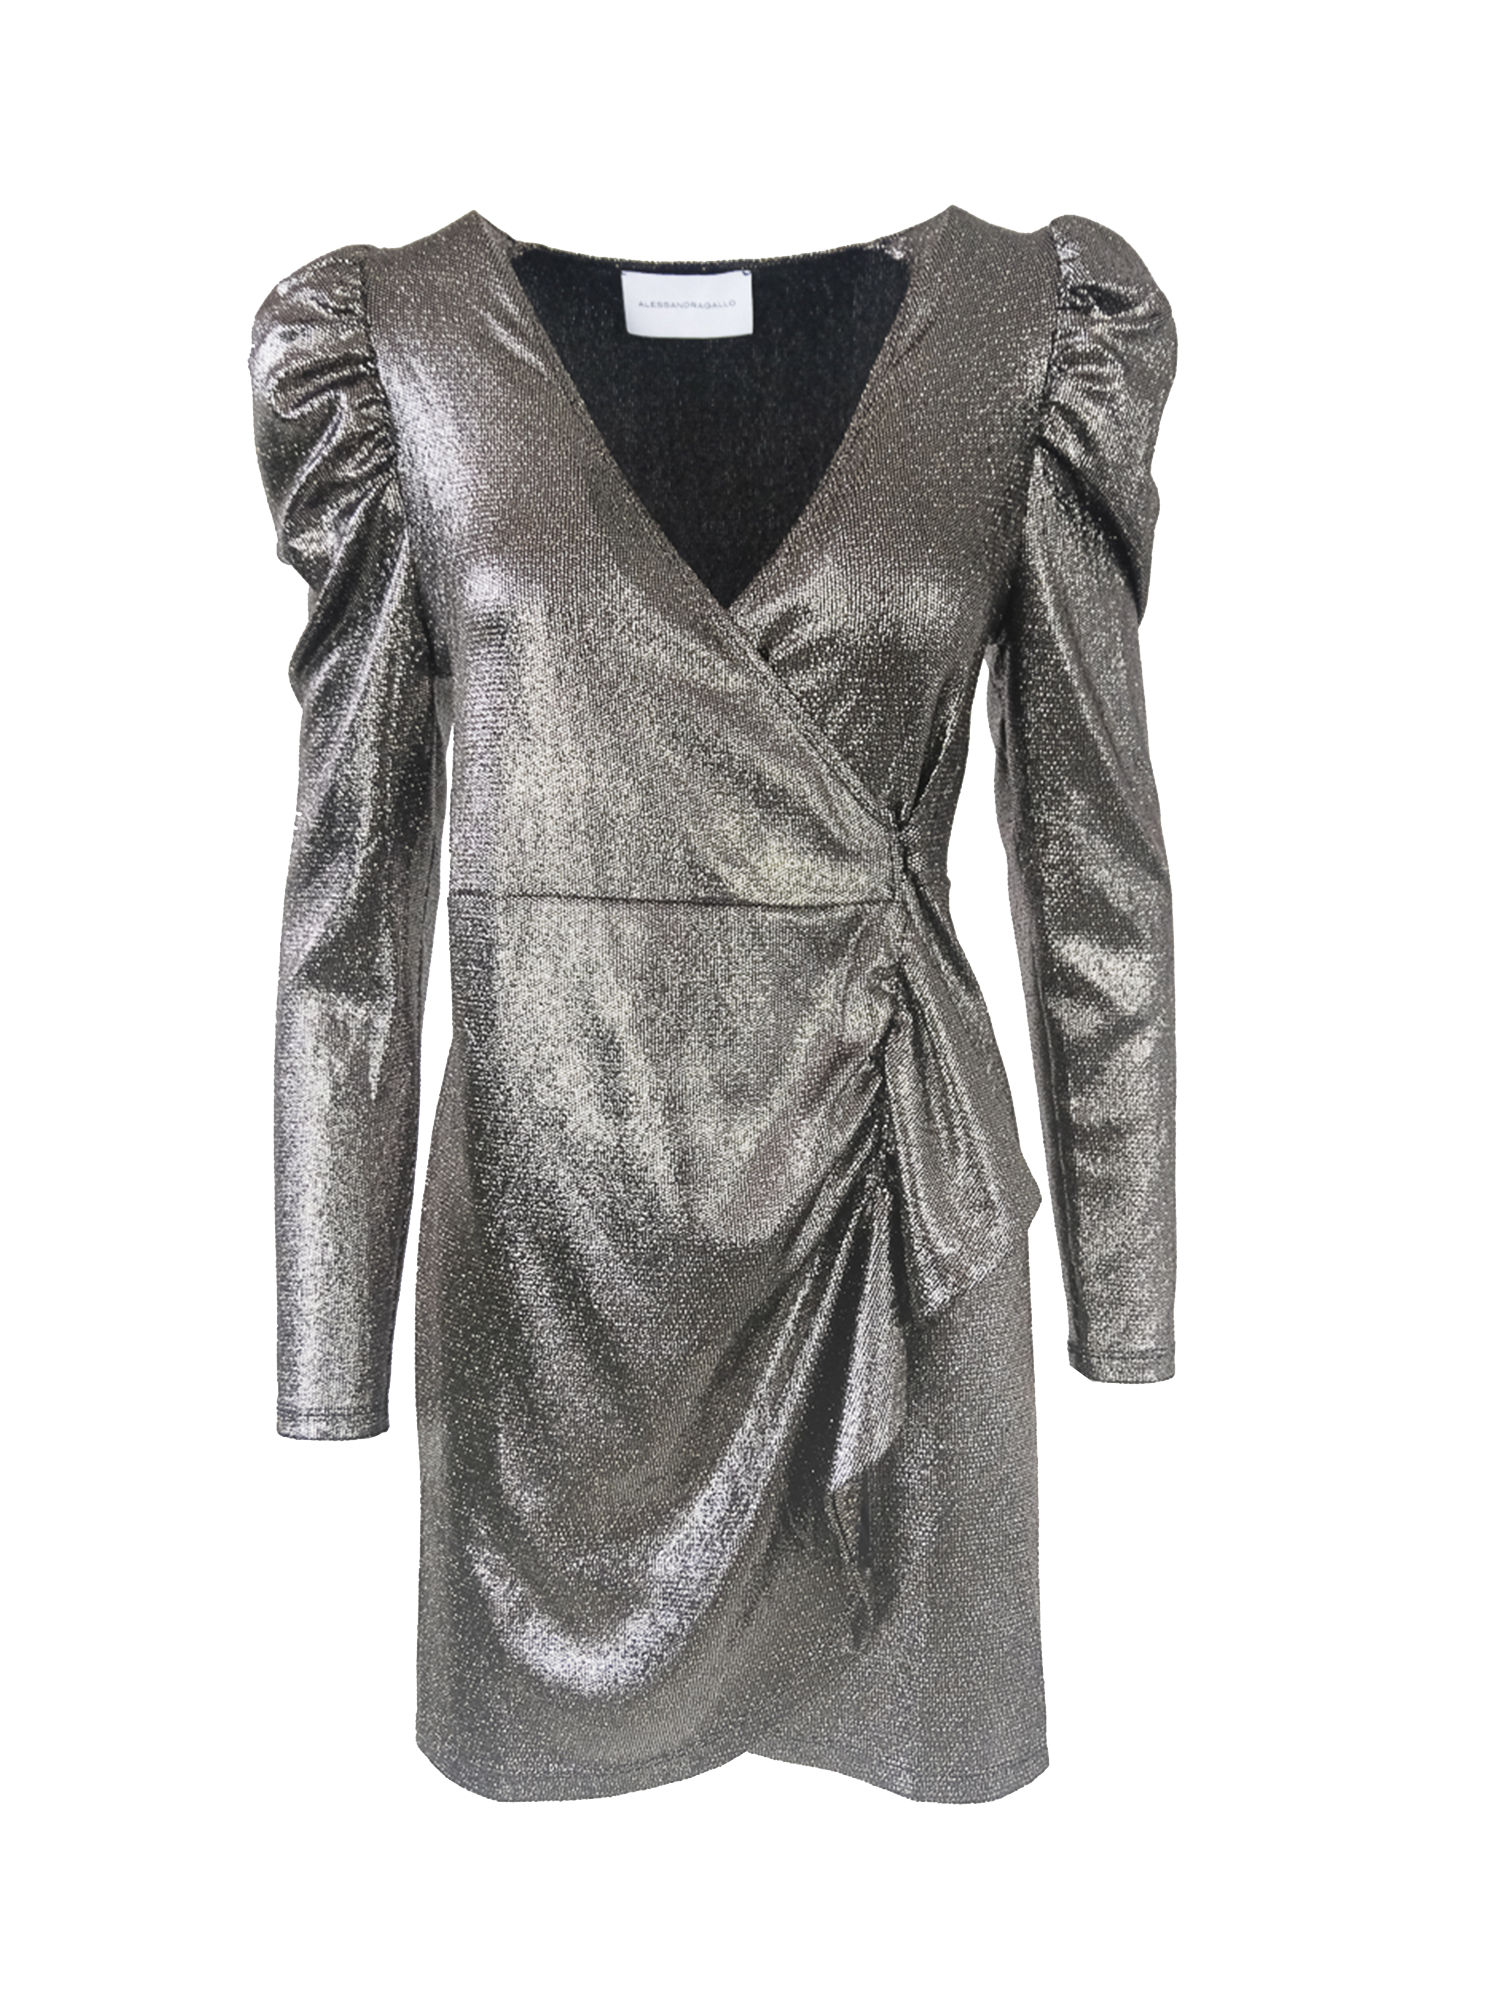 EMMA - dress with long puff sleeve in charcoal grey lurex